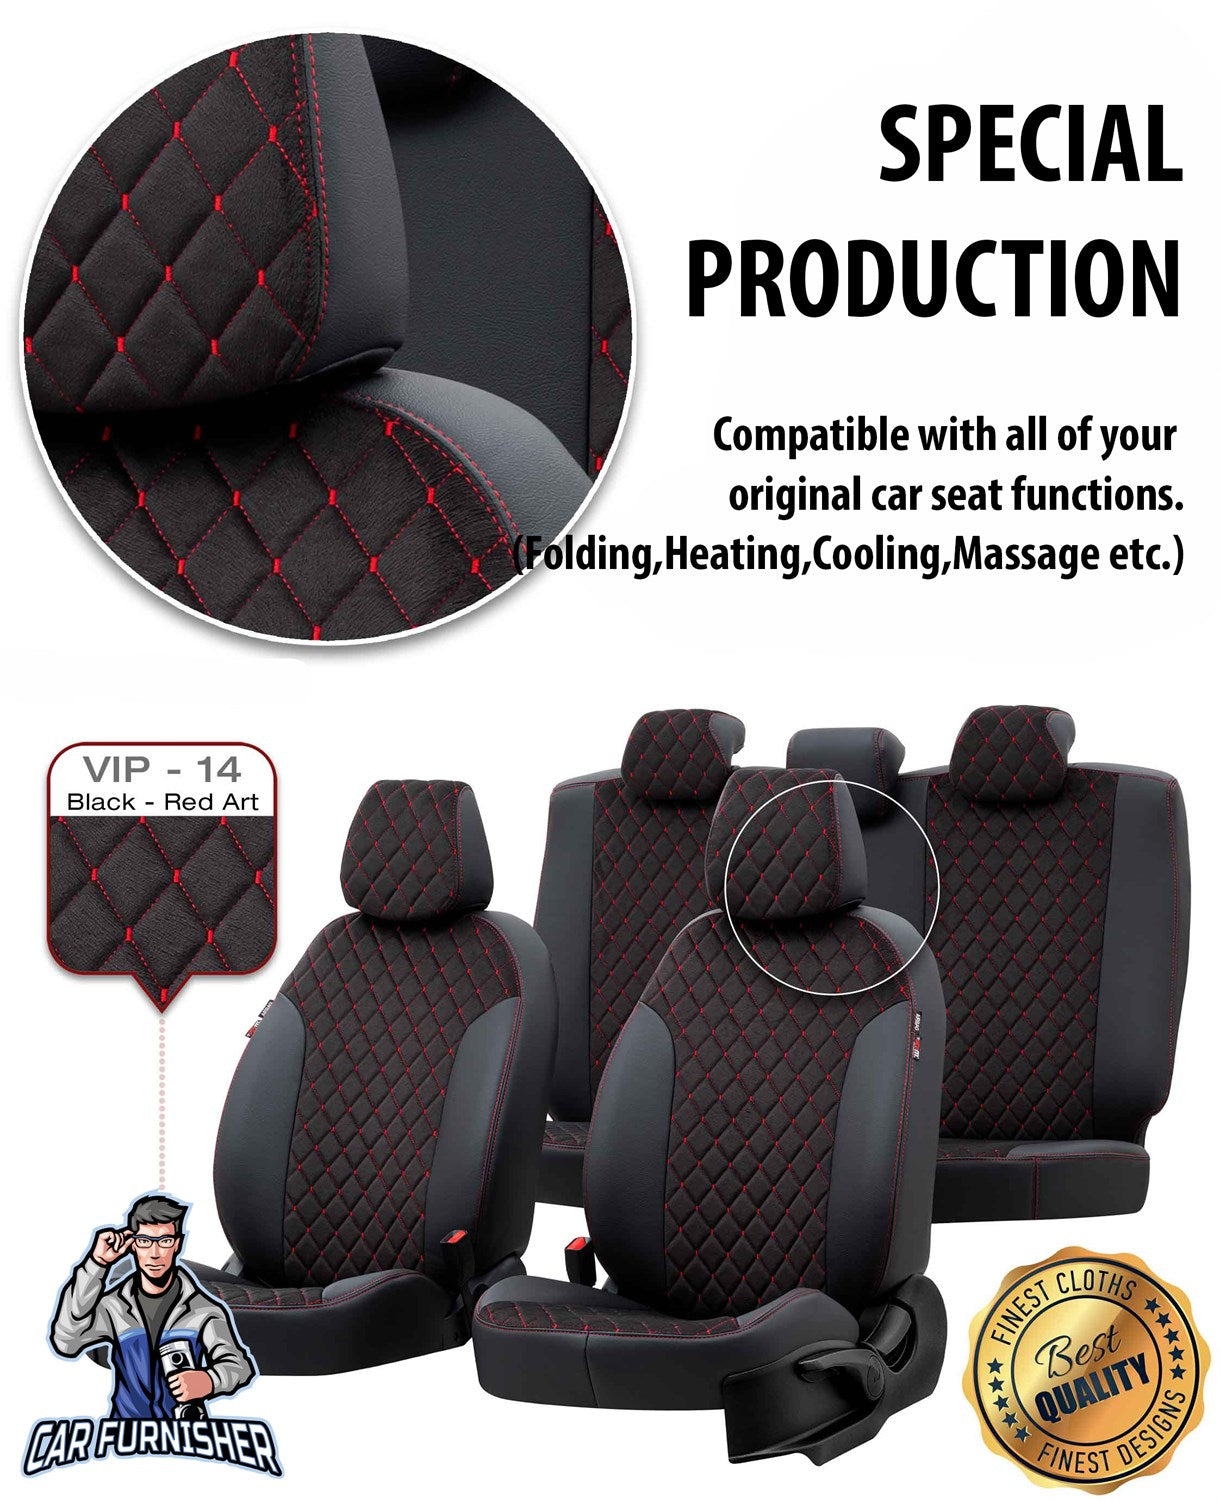 Toyota Corolla Seat Cover Madrid Foal Feather Design Smoked Leather & Foal Feather